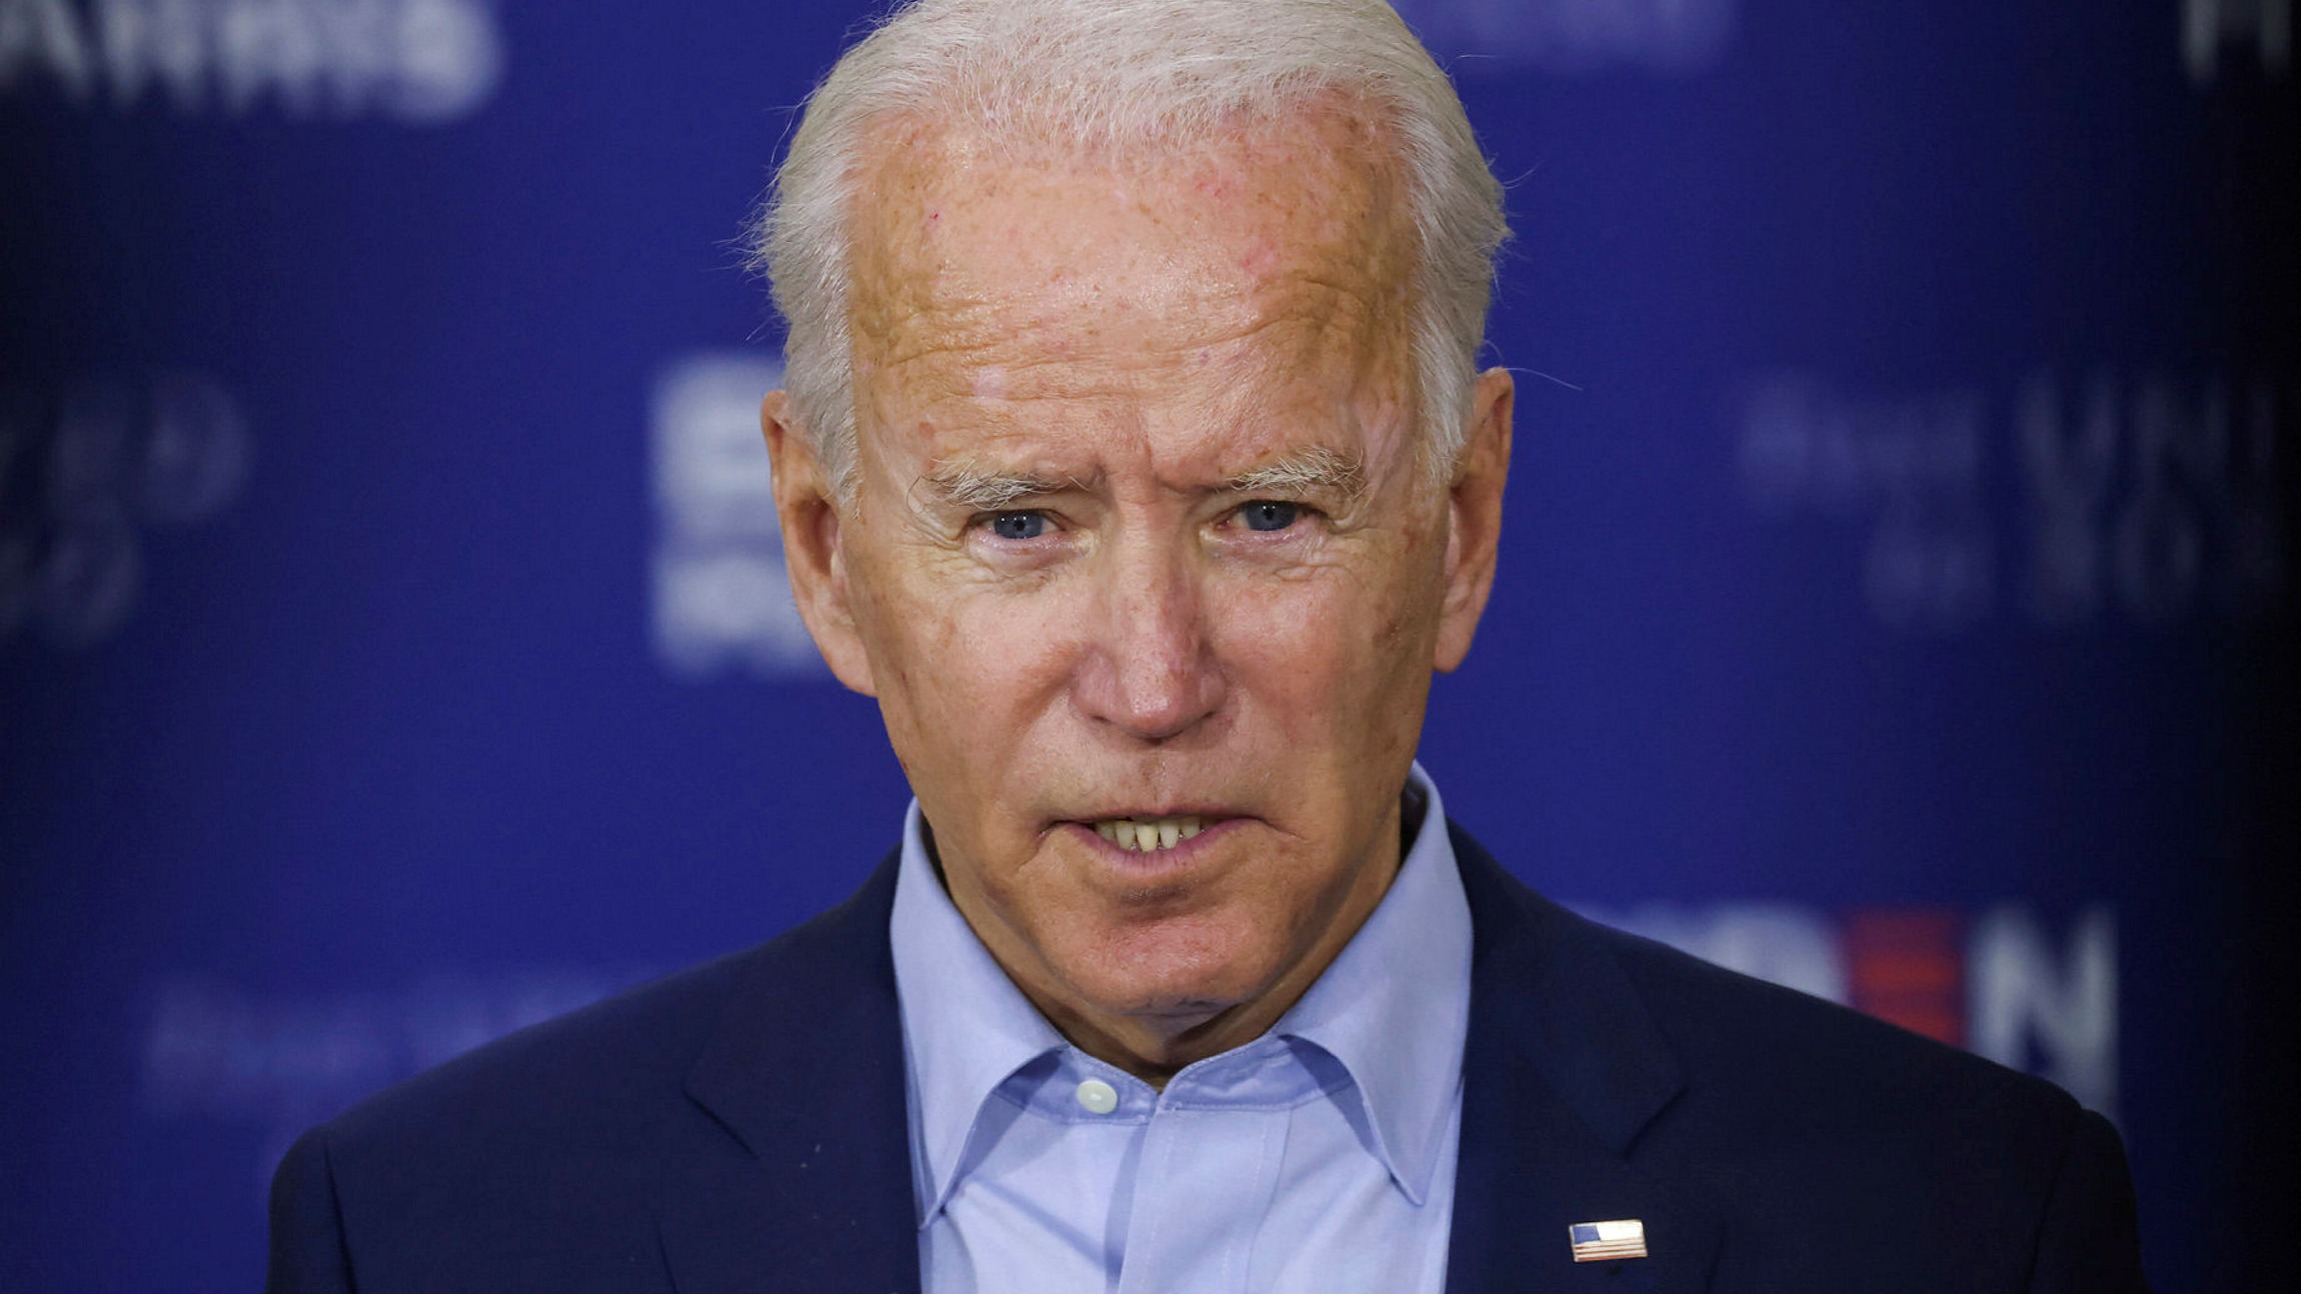 Articles written by US presidential candidate Joe Biden suggest that the pillars of his foreign policy can be captured by three Ds: Domestic, Deterrence and Democracy